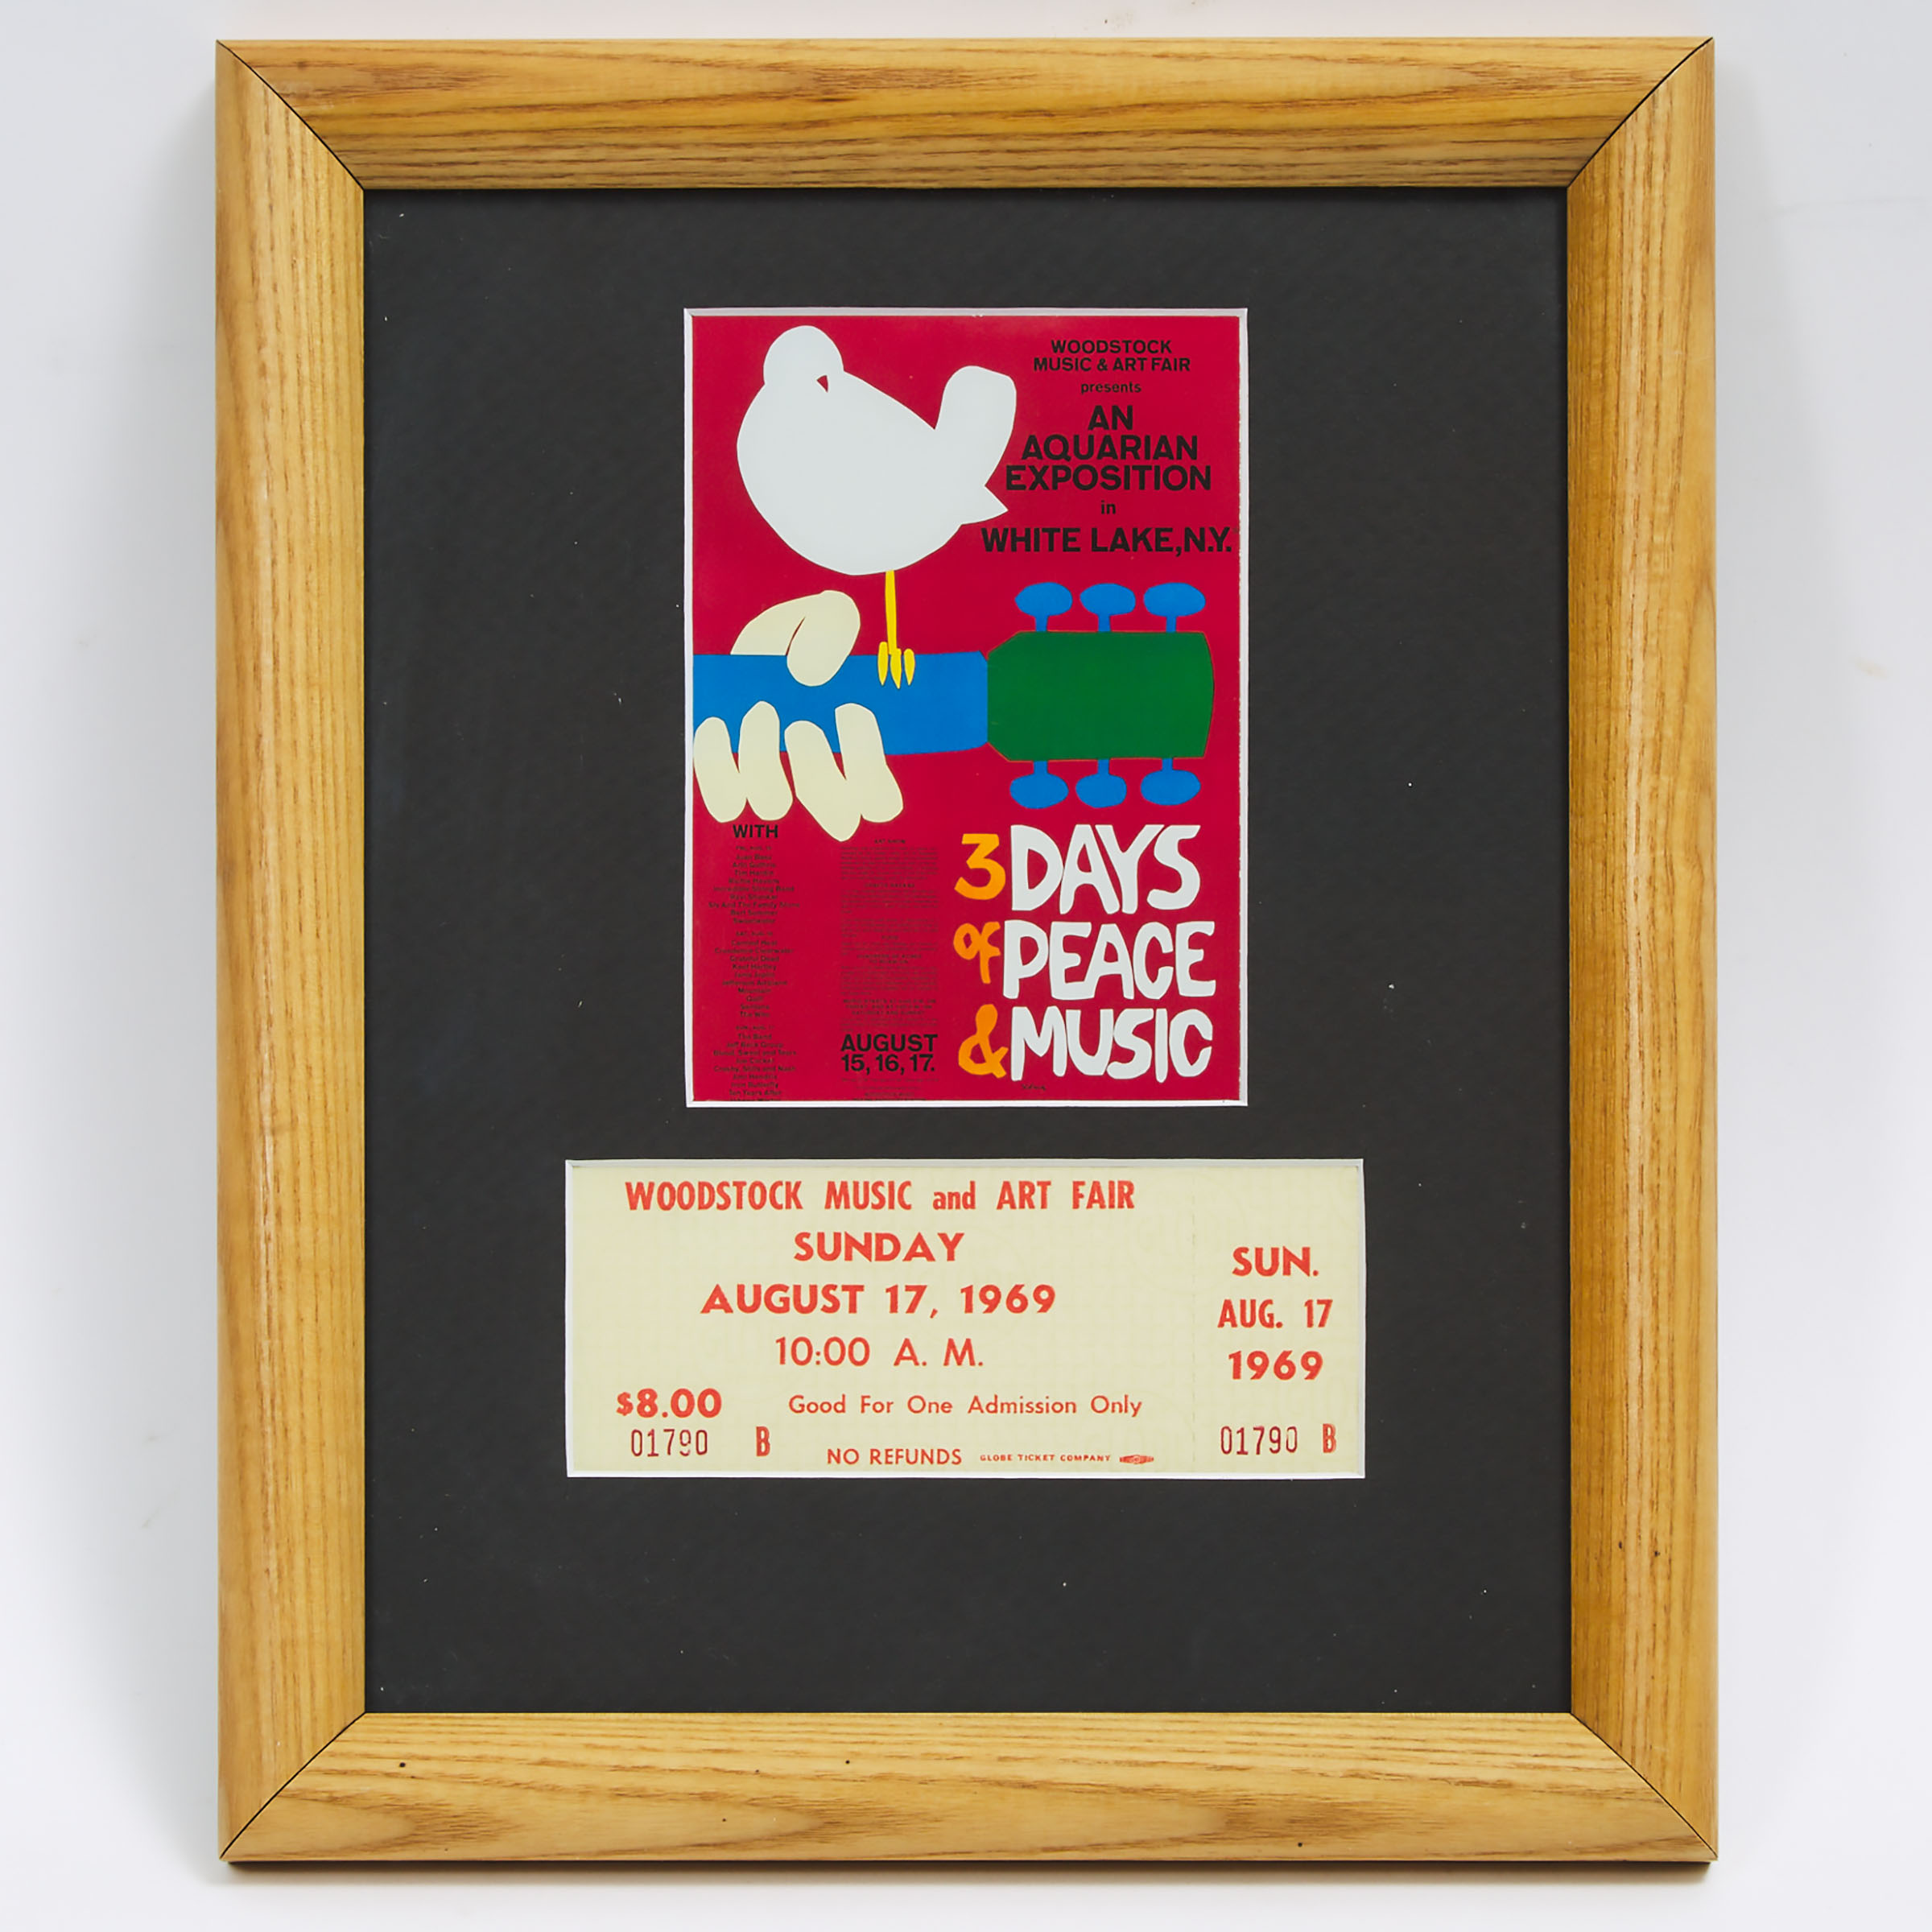 Woodstock Music and Art Fair Unclipped Ticket, Sun., Aug. 17, 1969